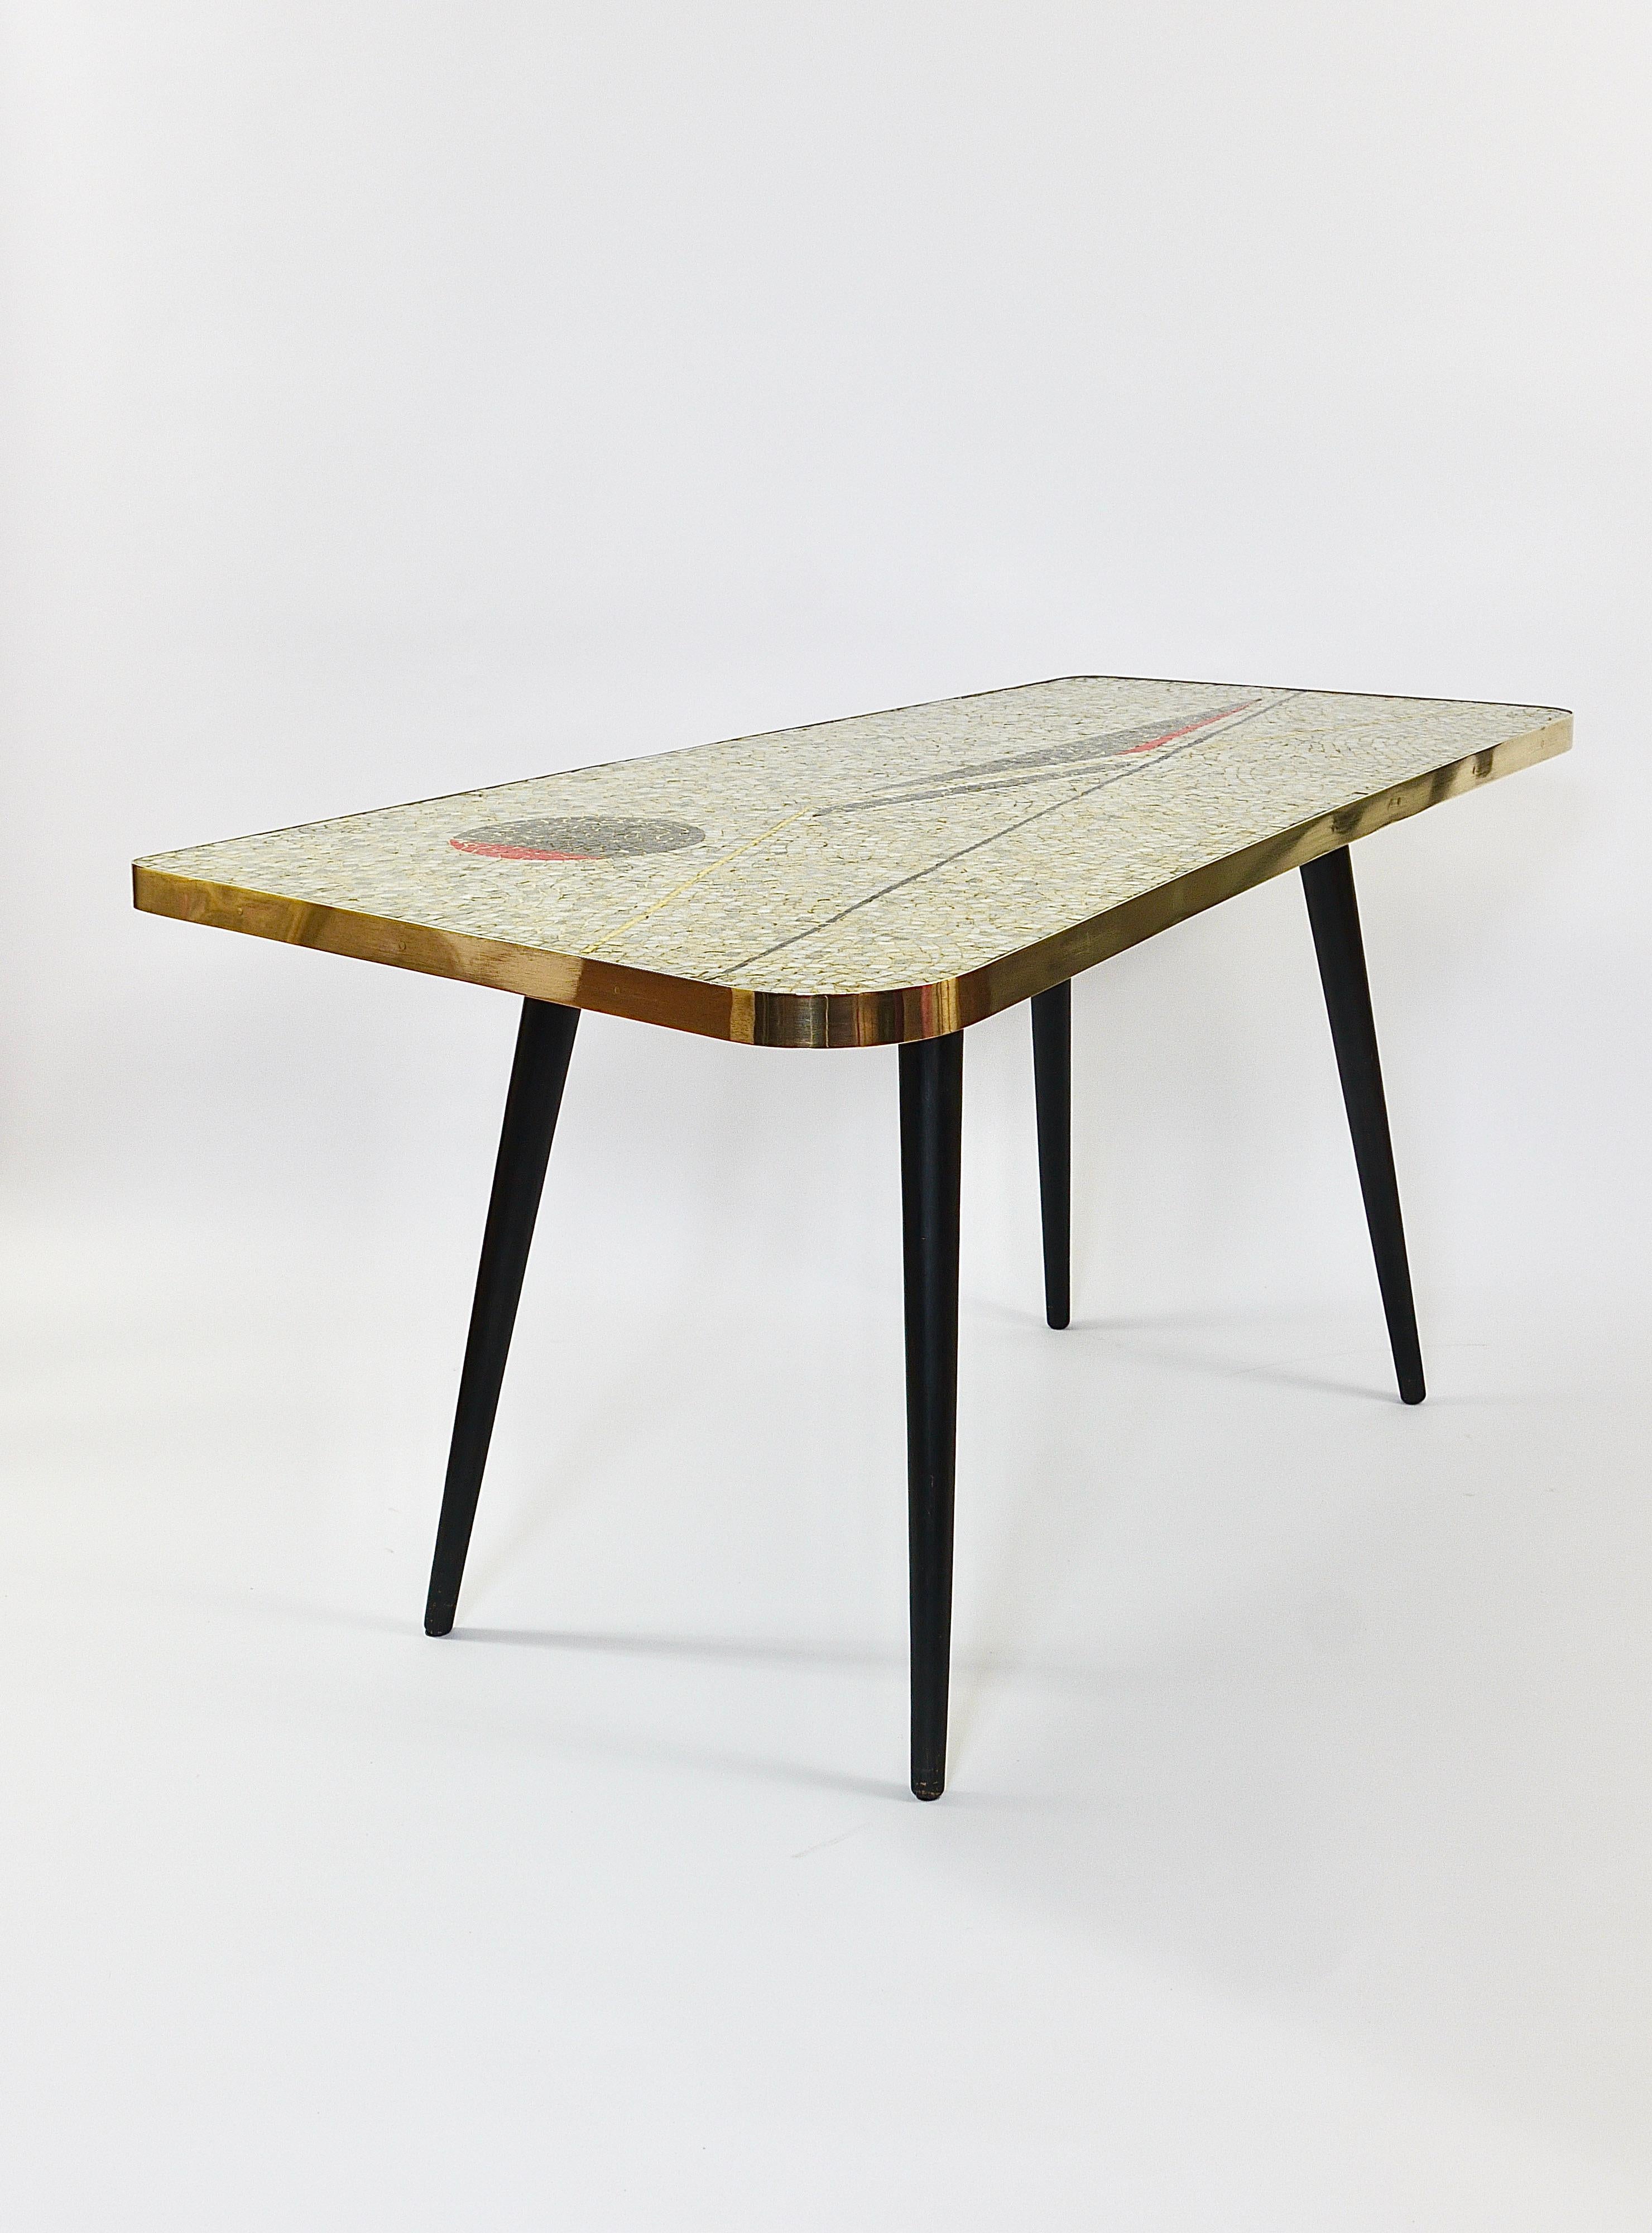 Berthold Muller Asymmetrical Mosaic Tile Coffee or Sofa Table, Germany, 1950s For Sale 1